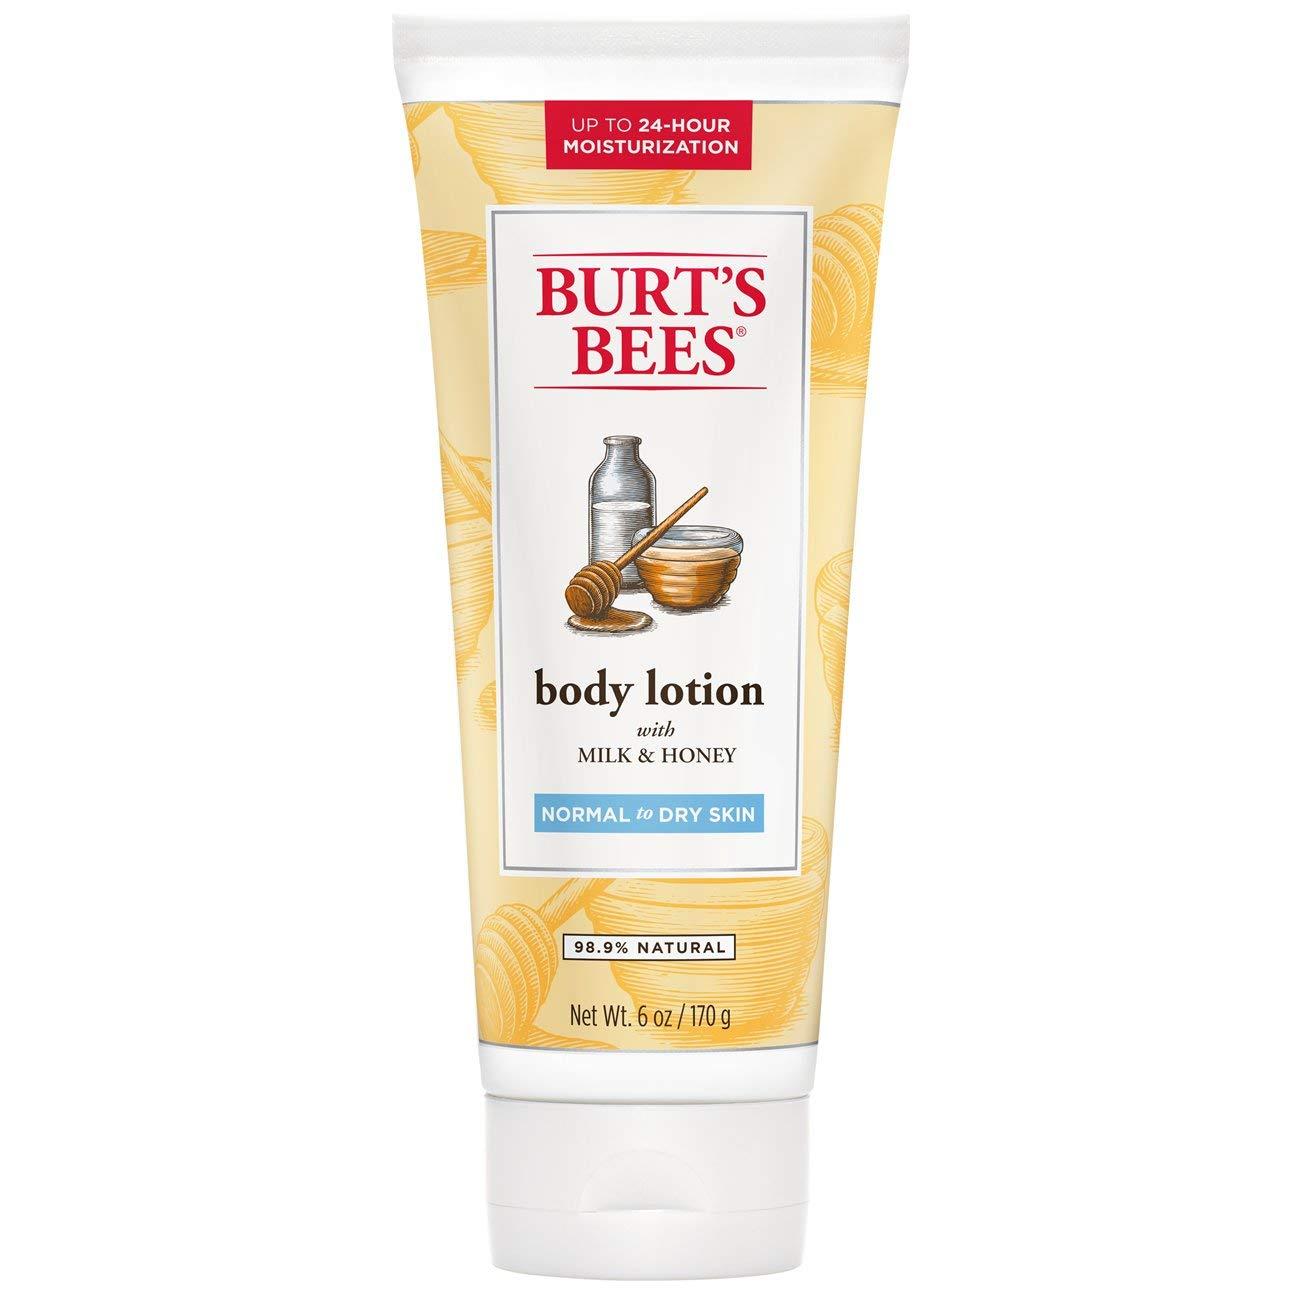 Burt's Bees Body Lotion with Milk & Honey, Normal to Dry Skin, 6 Oz (170 G)